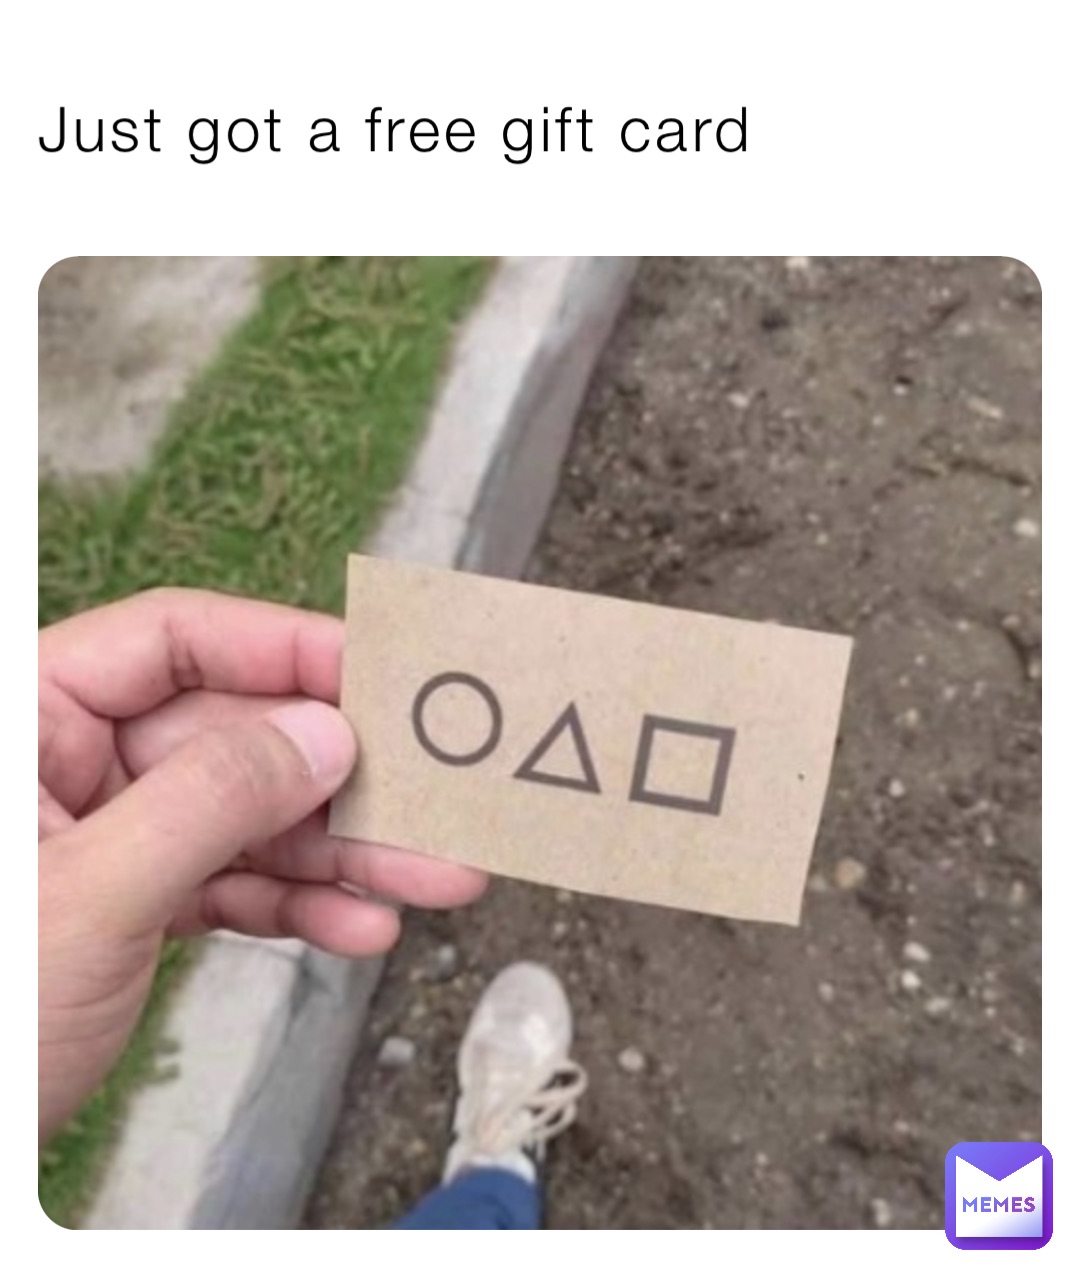 Just got a free gift card